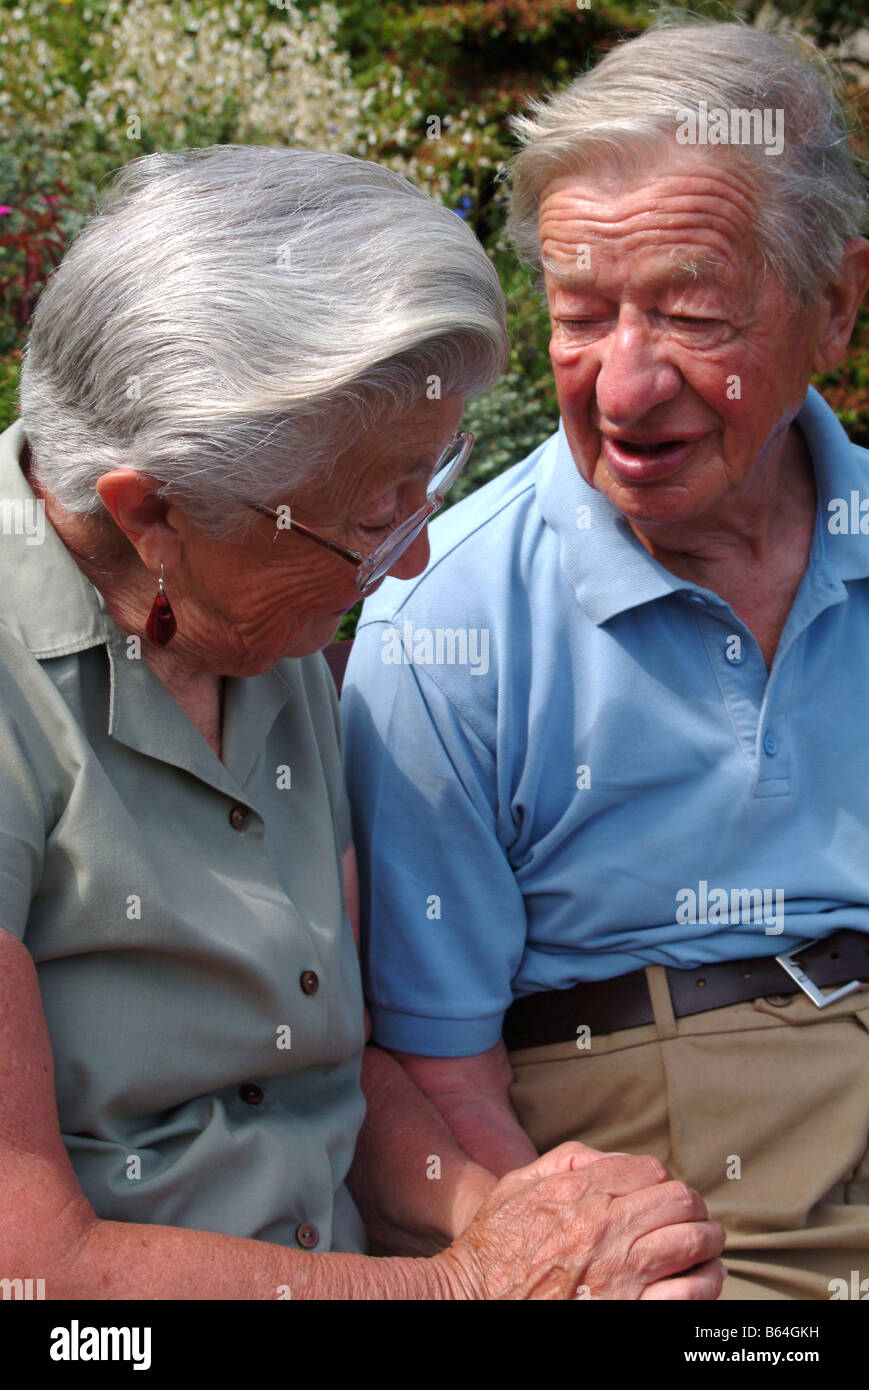 Elderly couple sitting and holding hands Stock Photo